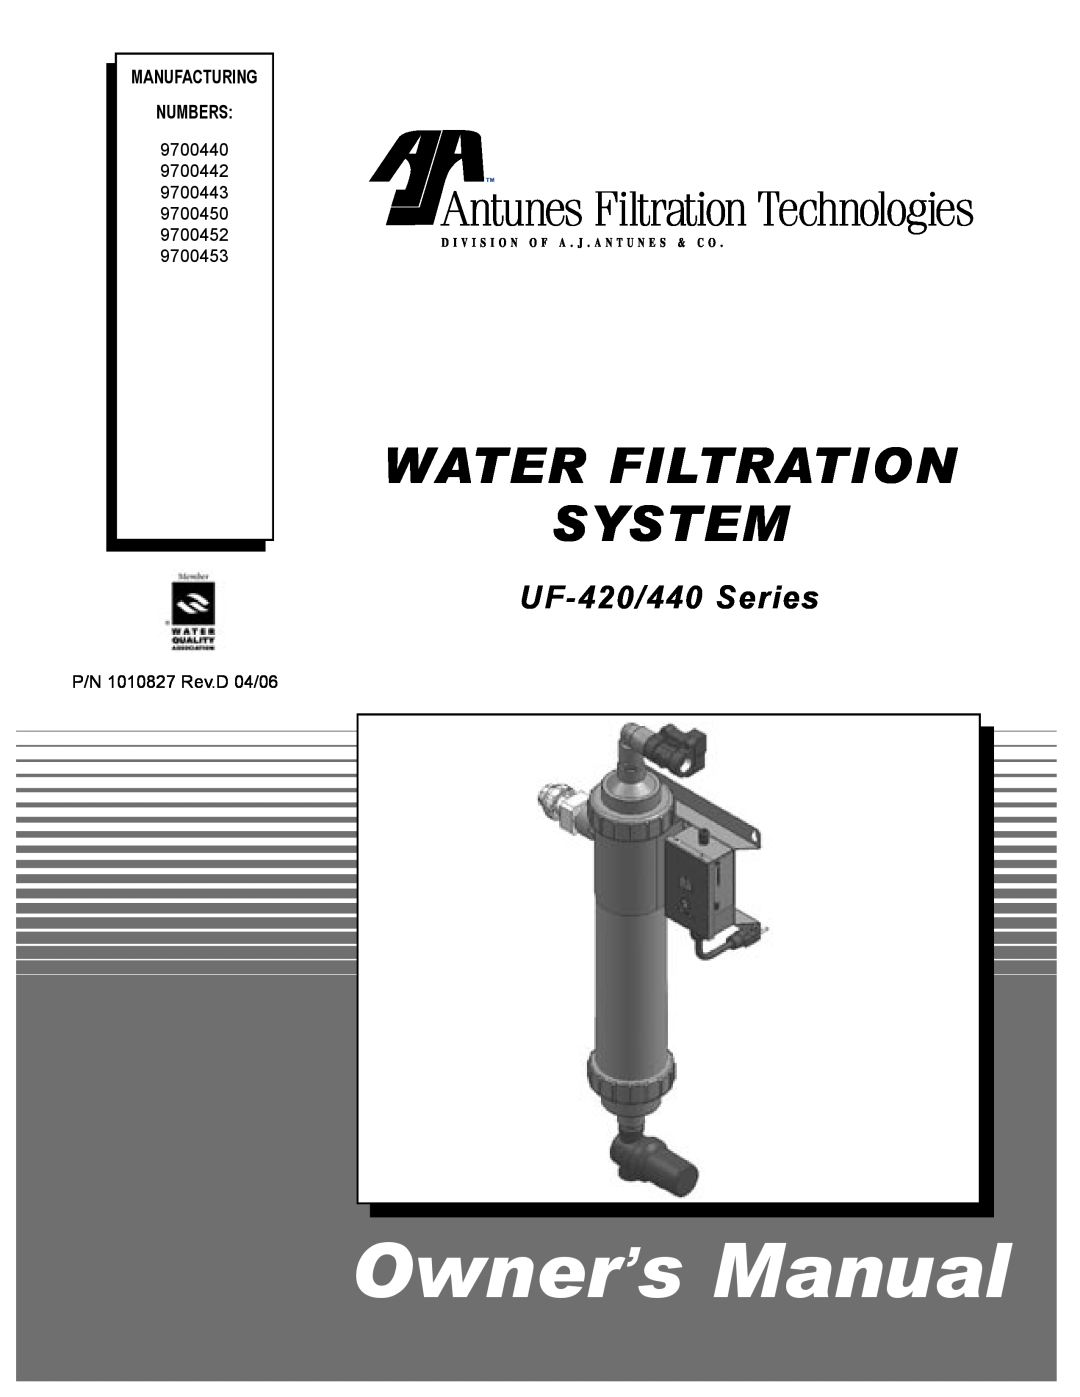 Antunes, AJ owner manual Manufacturing Numbers, Owner’s Manual, Water Filtration System, UF-420/440 Series 